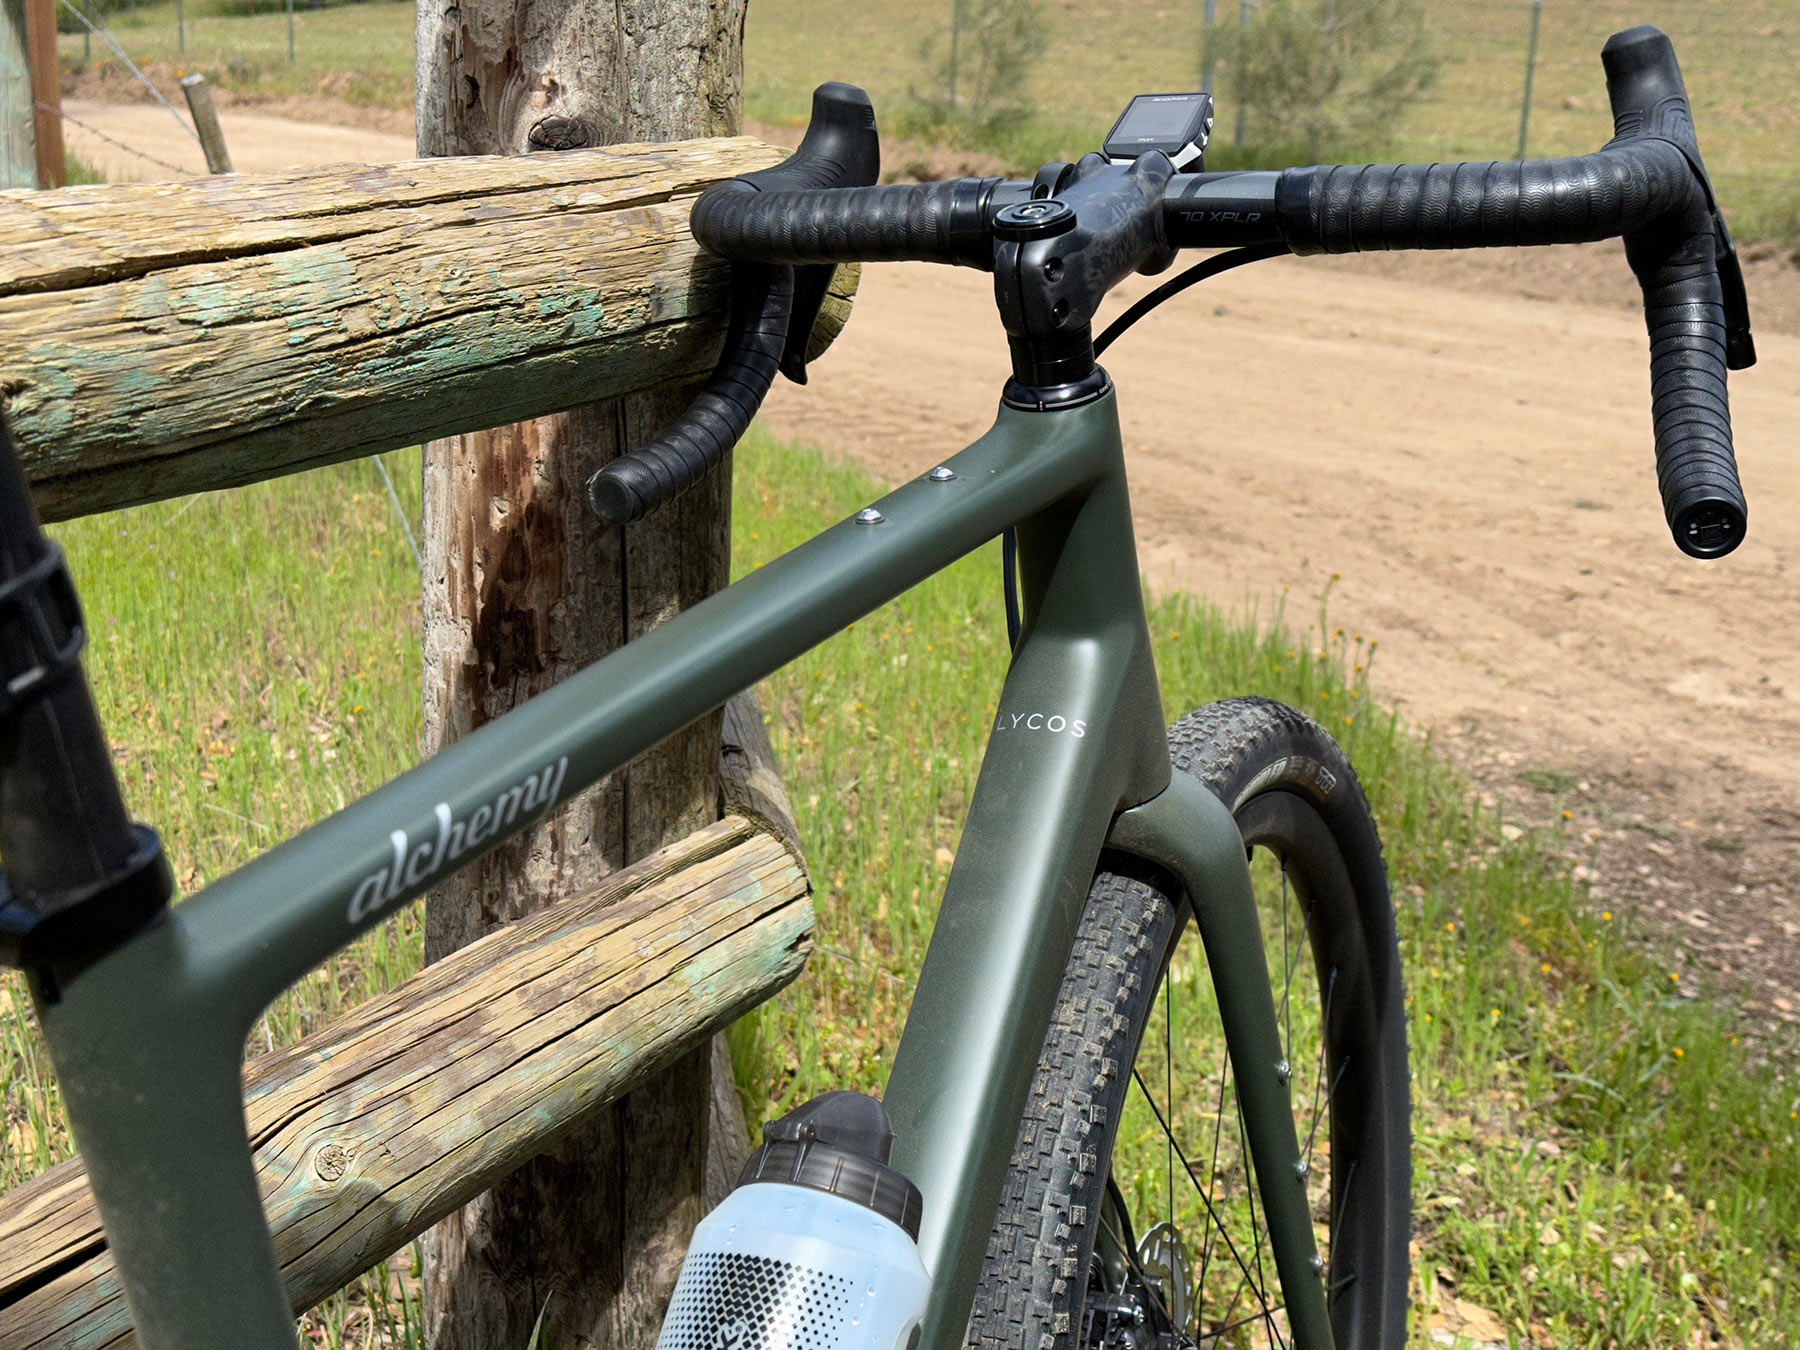 alchemy lycos gravel bike review with closeup details of headtube and top tube bag mounts